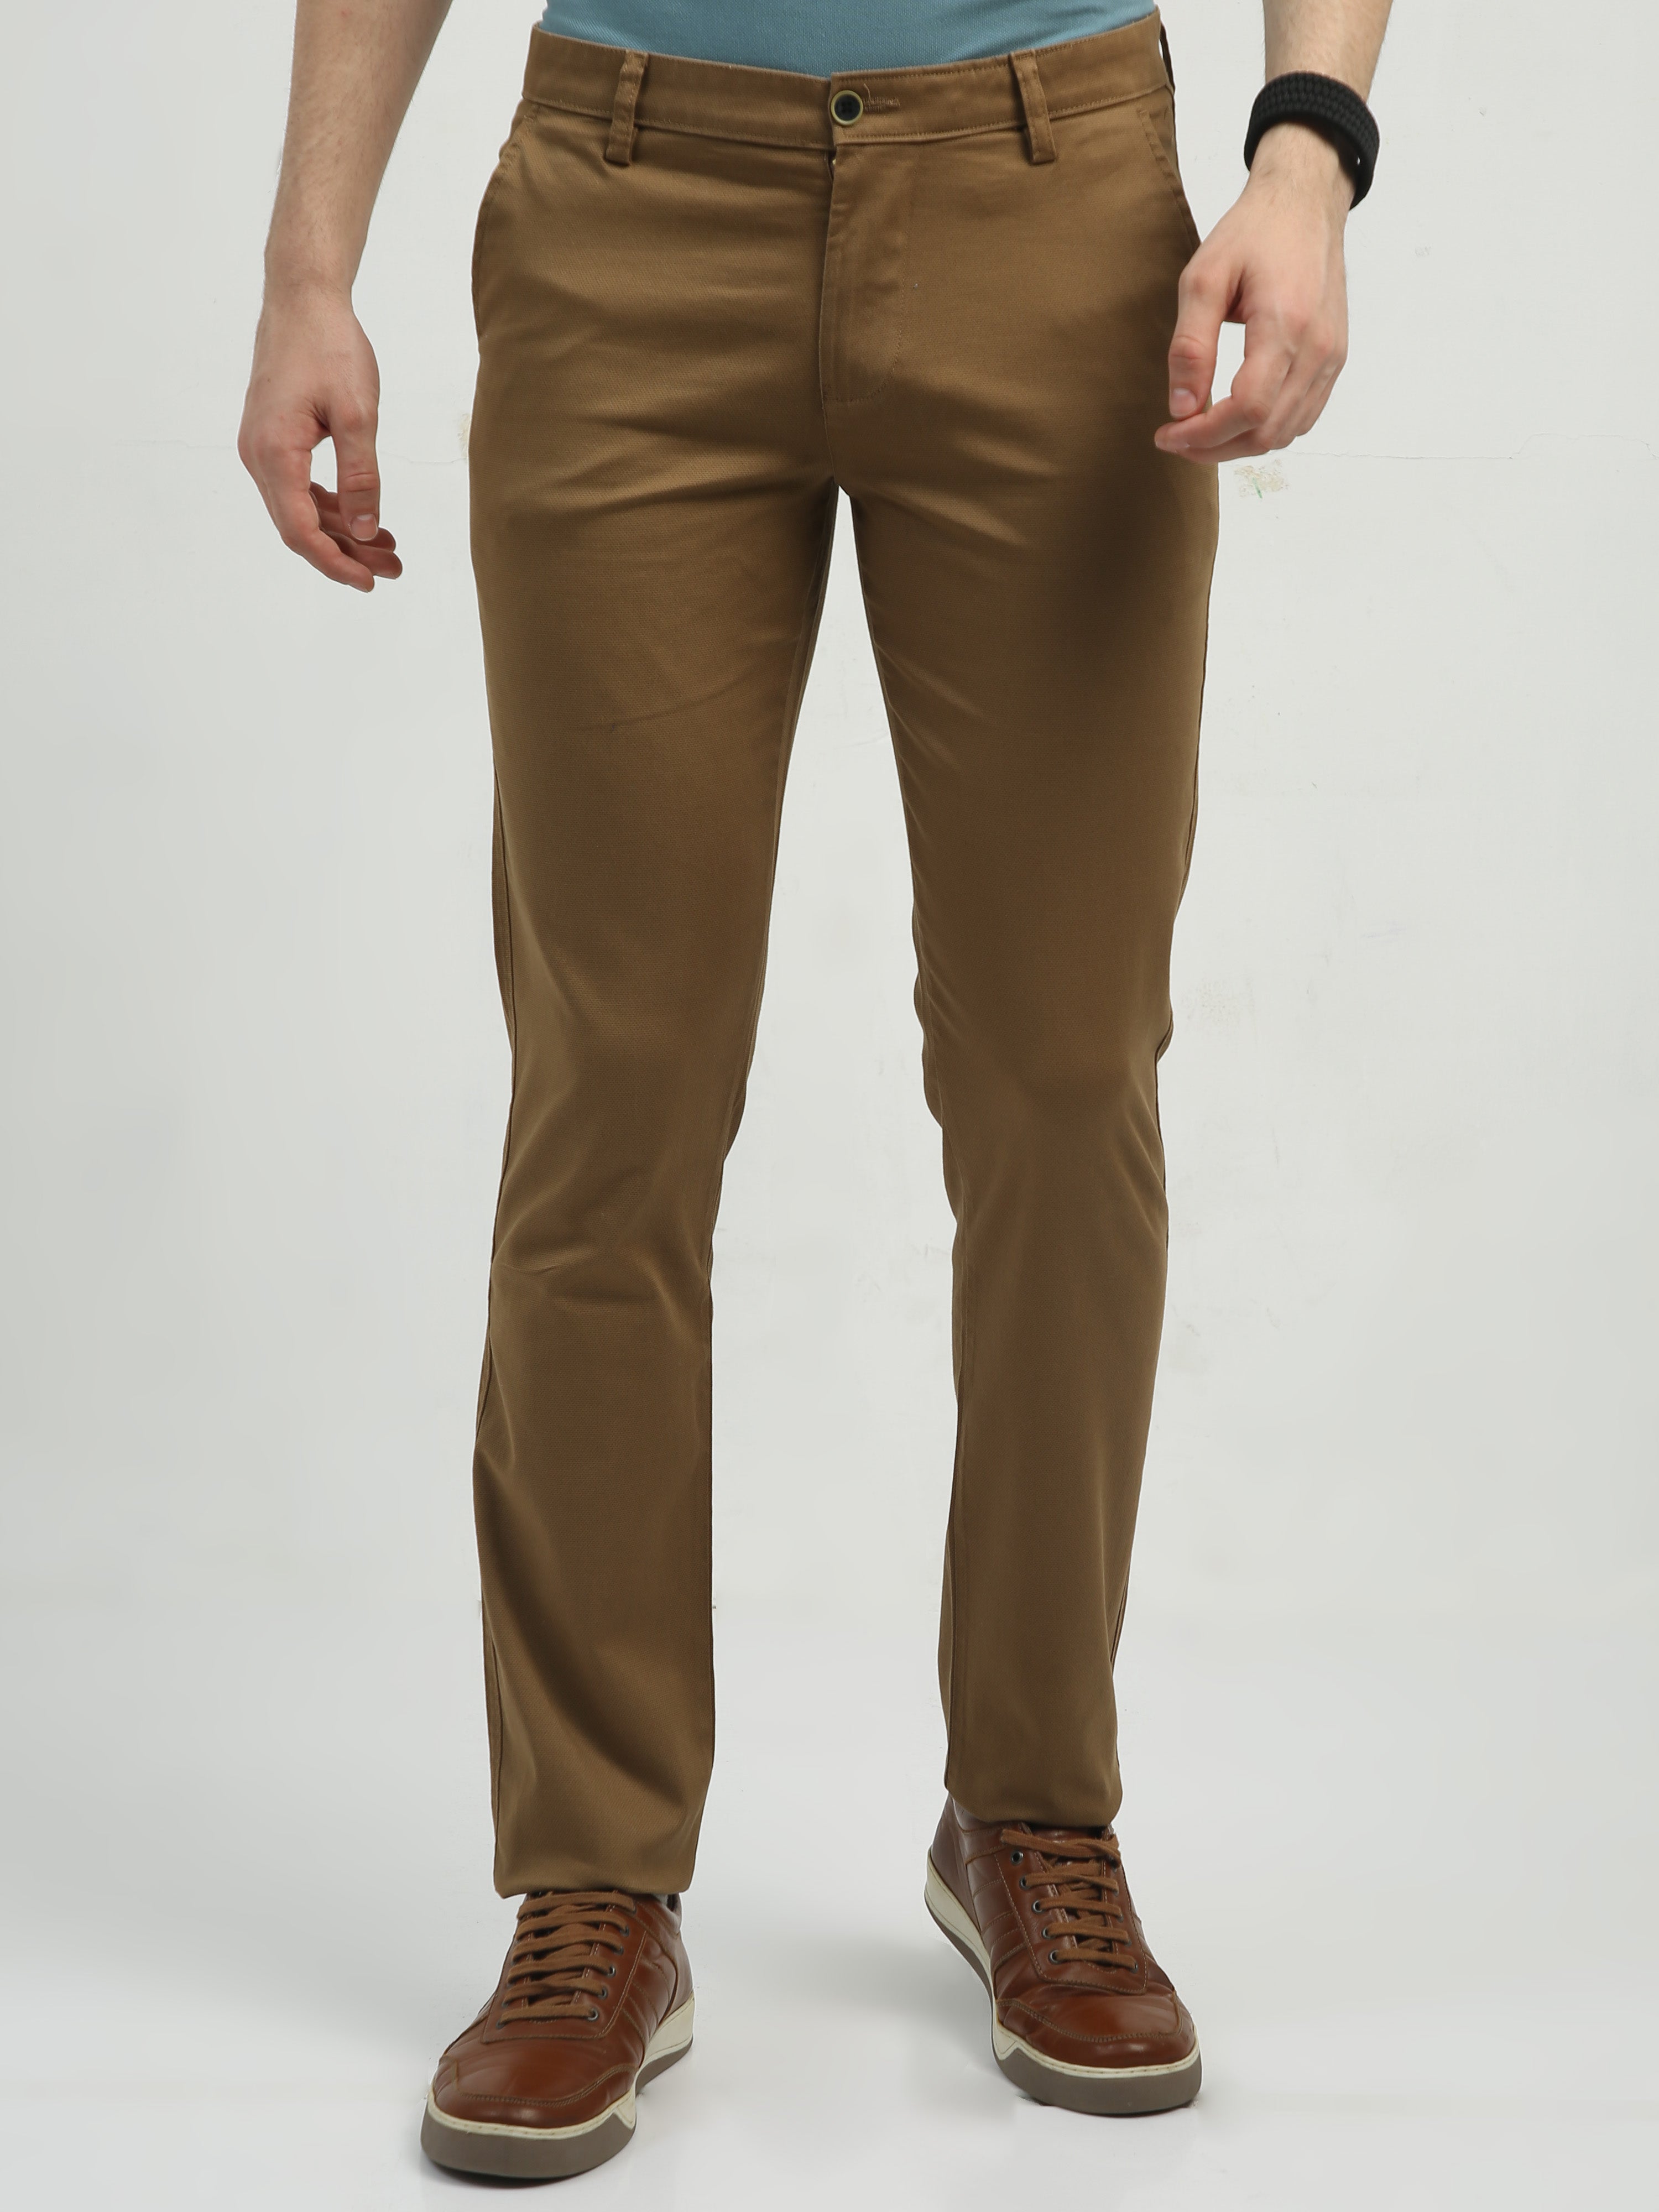 Classic Polo Men's   Chiseled Fit Cotton Trousers | TBO2-29 B-DKHA-CF-LY